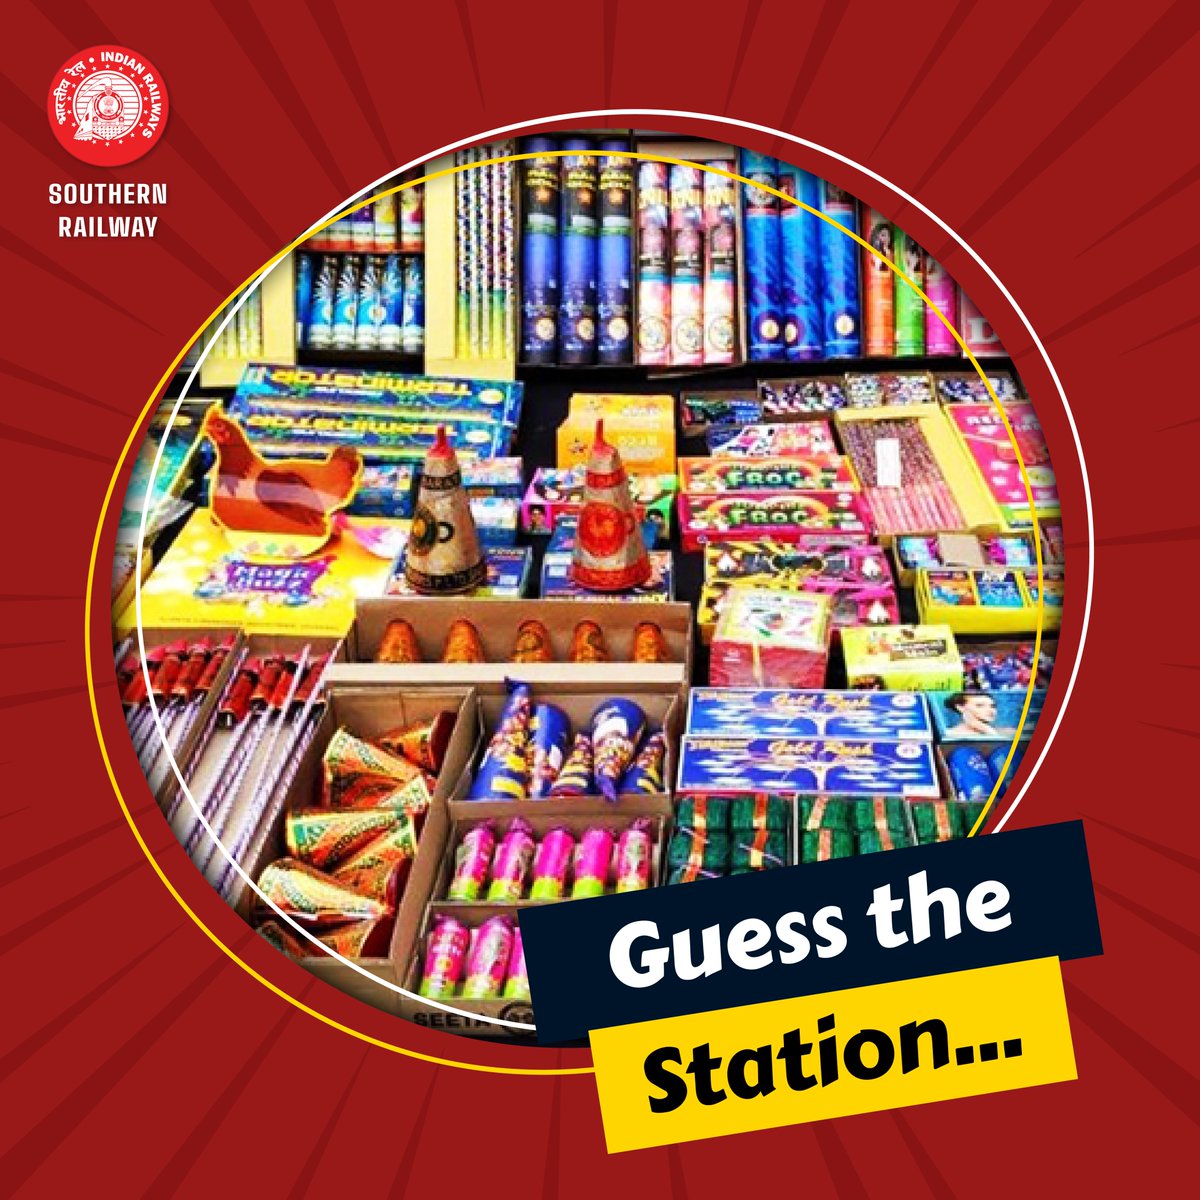 We're feeling explosive with this clue!    

What station is?.....  

Let us know your guesses in the comments! 

#GuessTheStation #SouthernRailway